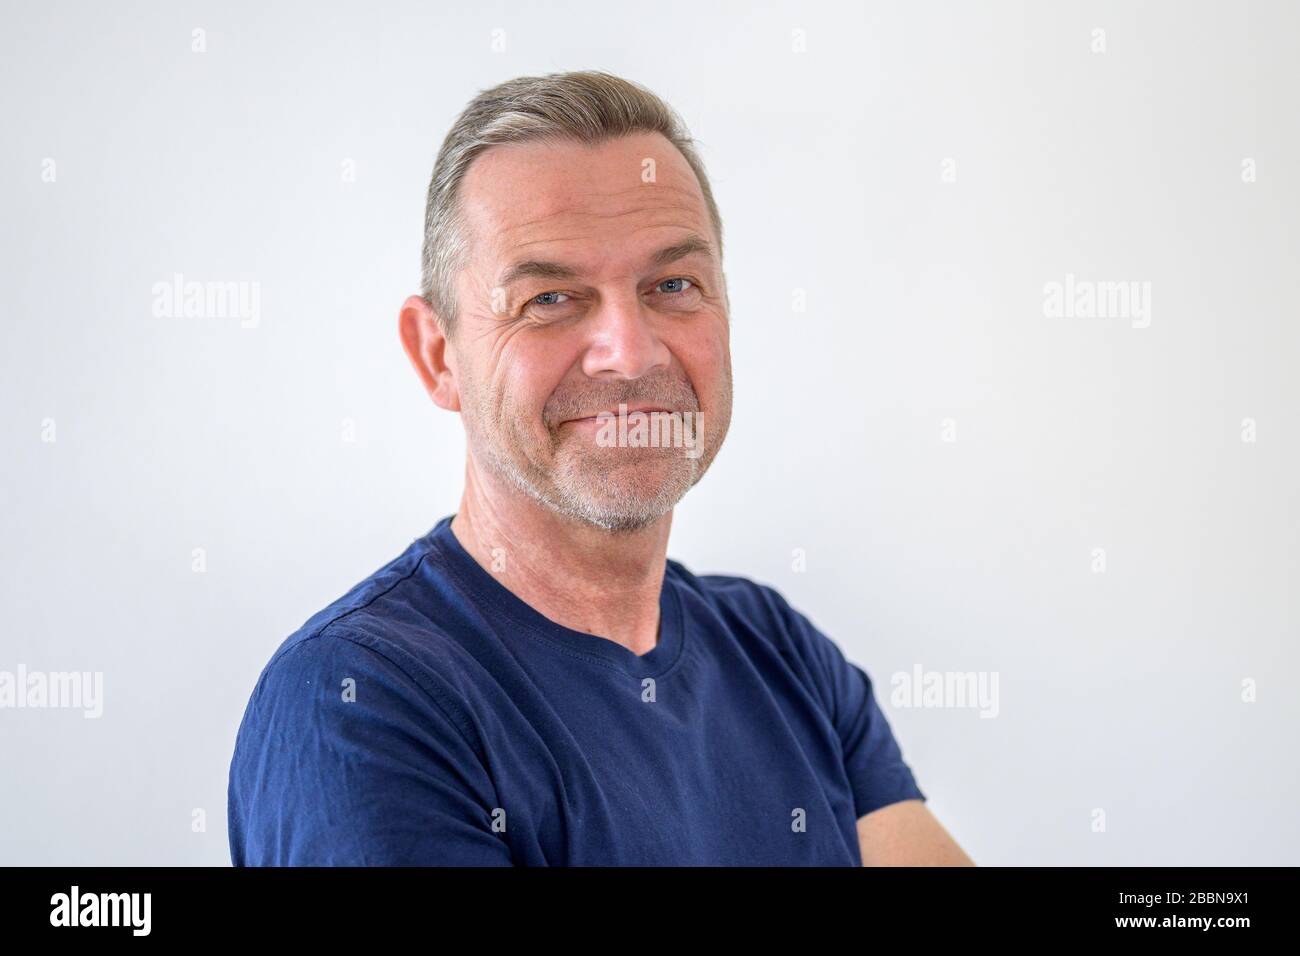 Smiling friendly attractive middle-aged man in casual blue T-shirt in a head and shoulders portrait on white with copy space Stock Photo